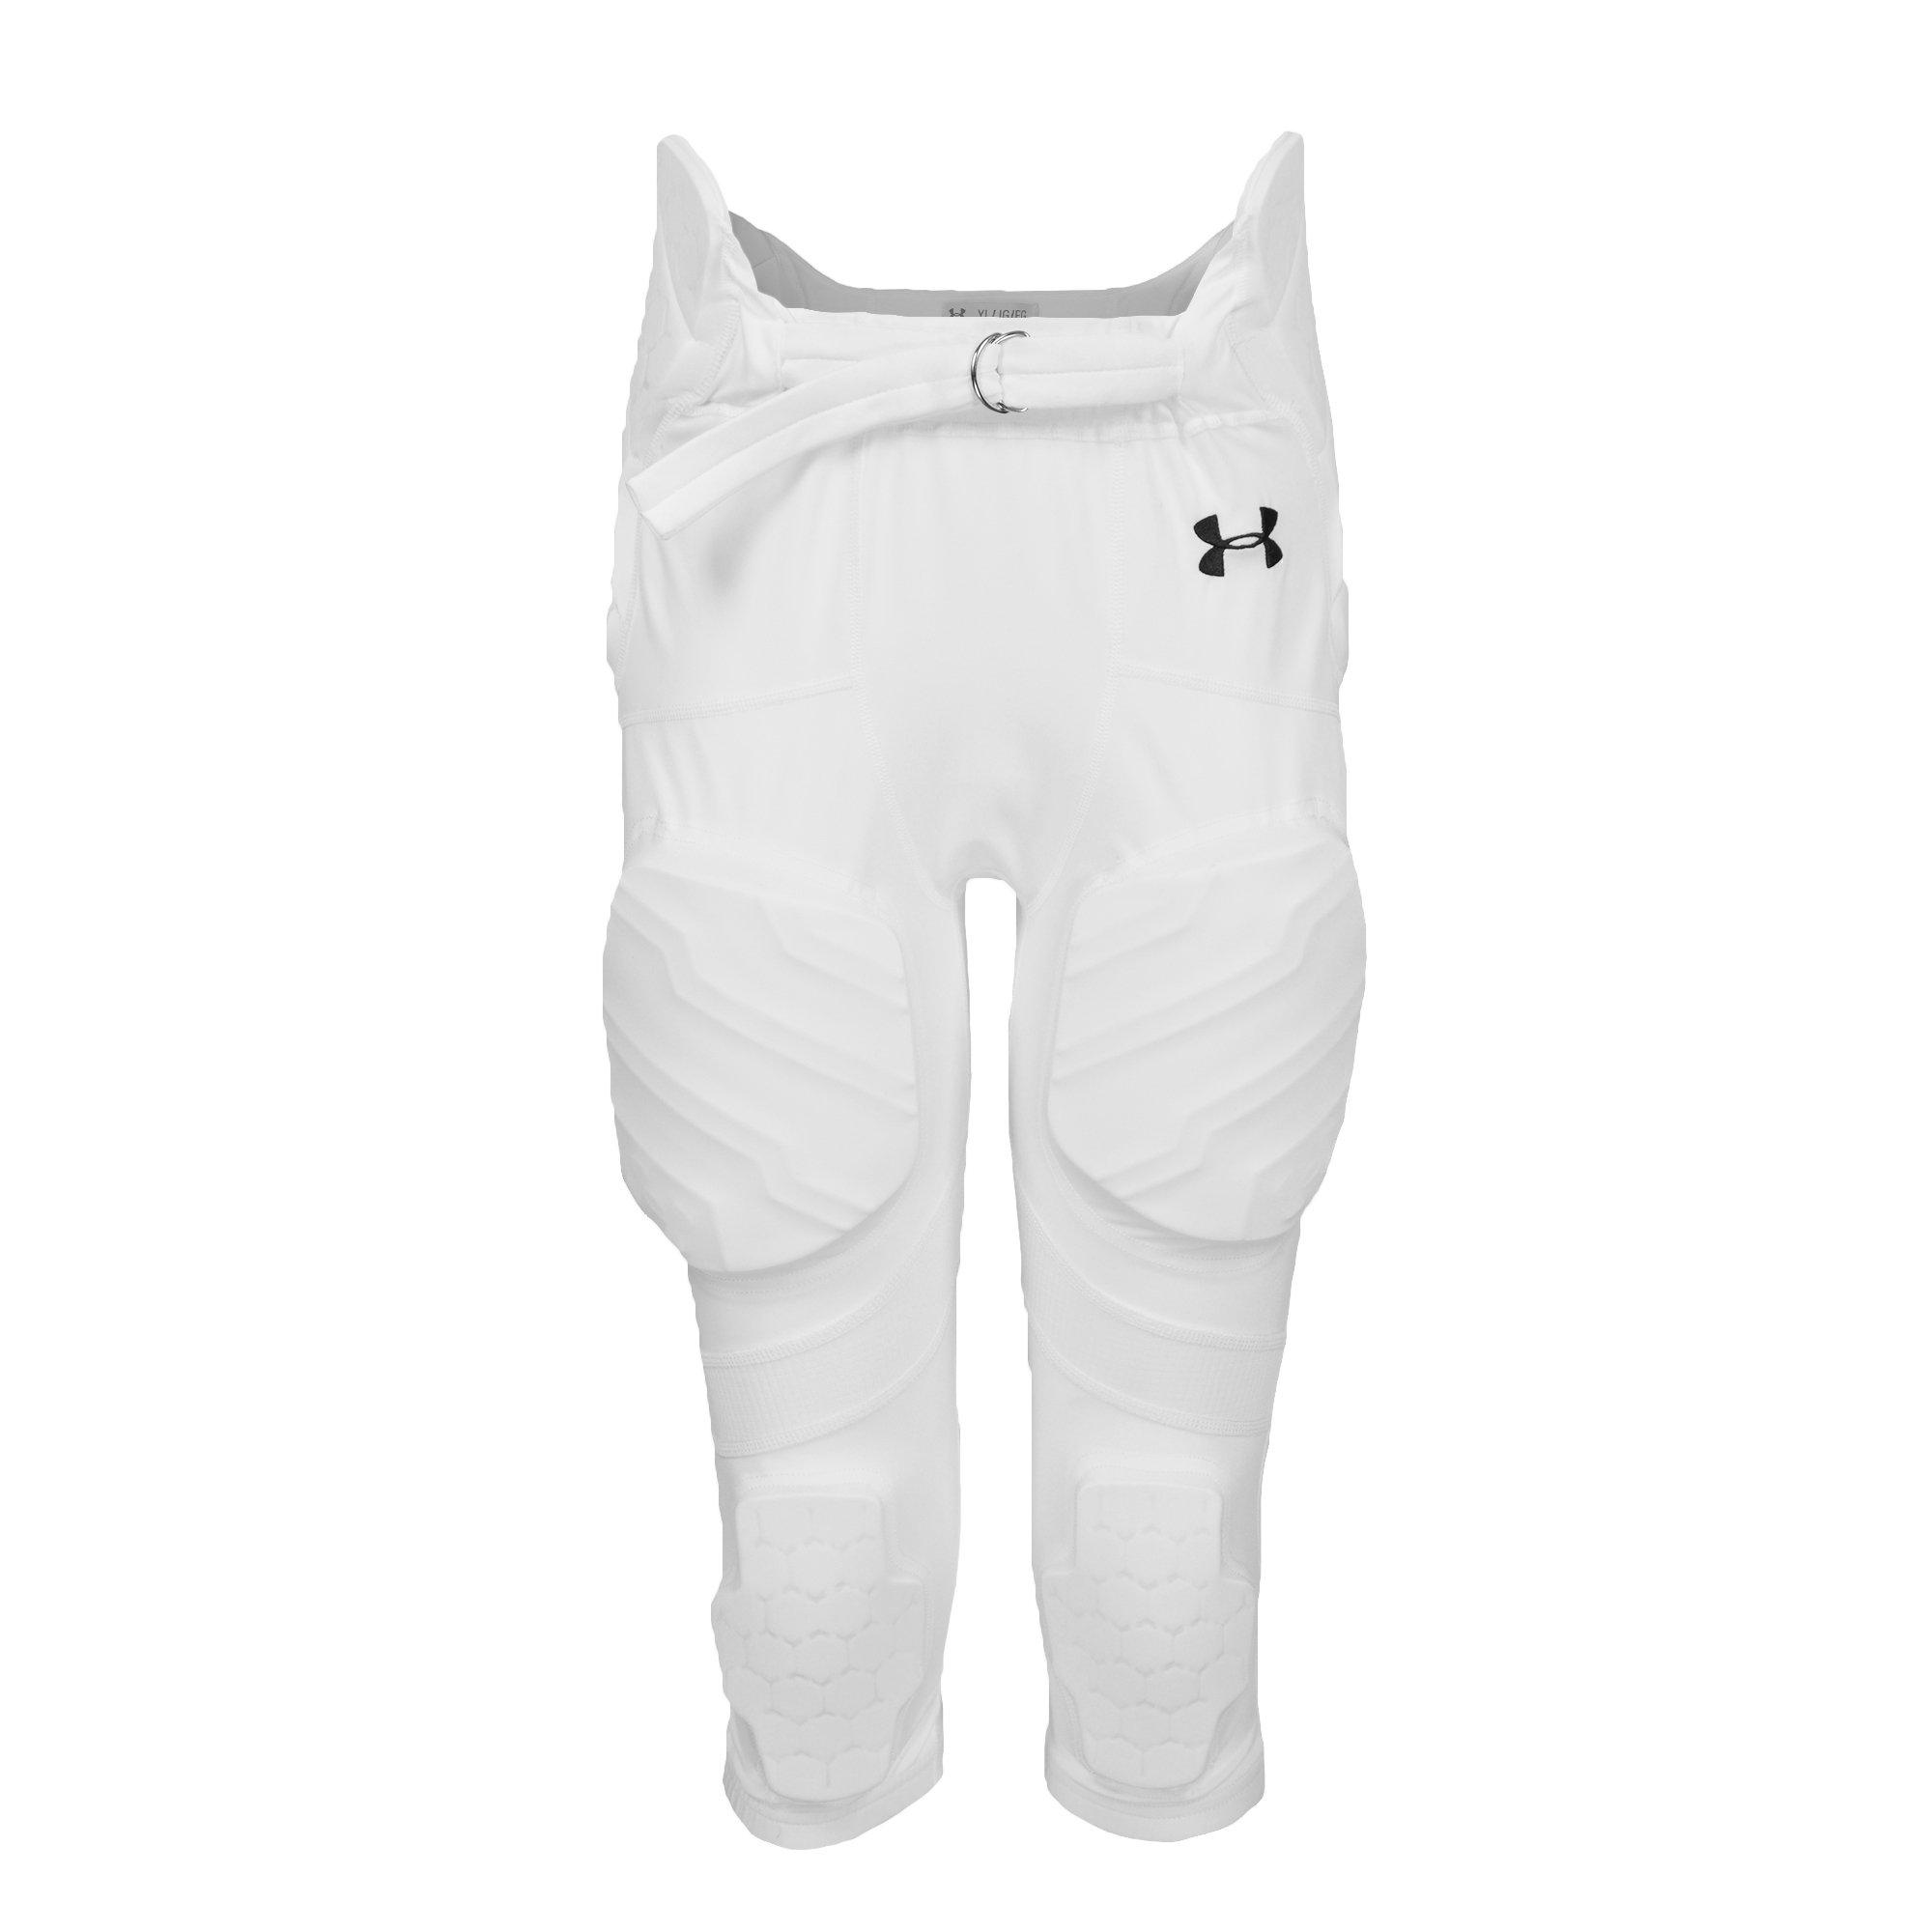 Under Armour Youth Integrated Football Pants White - LARGE